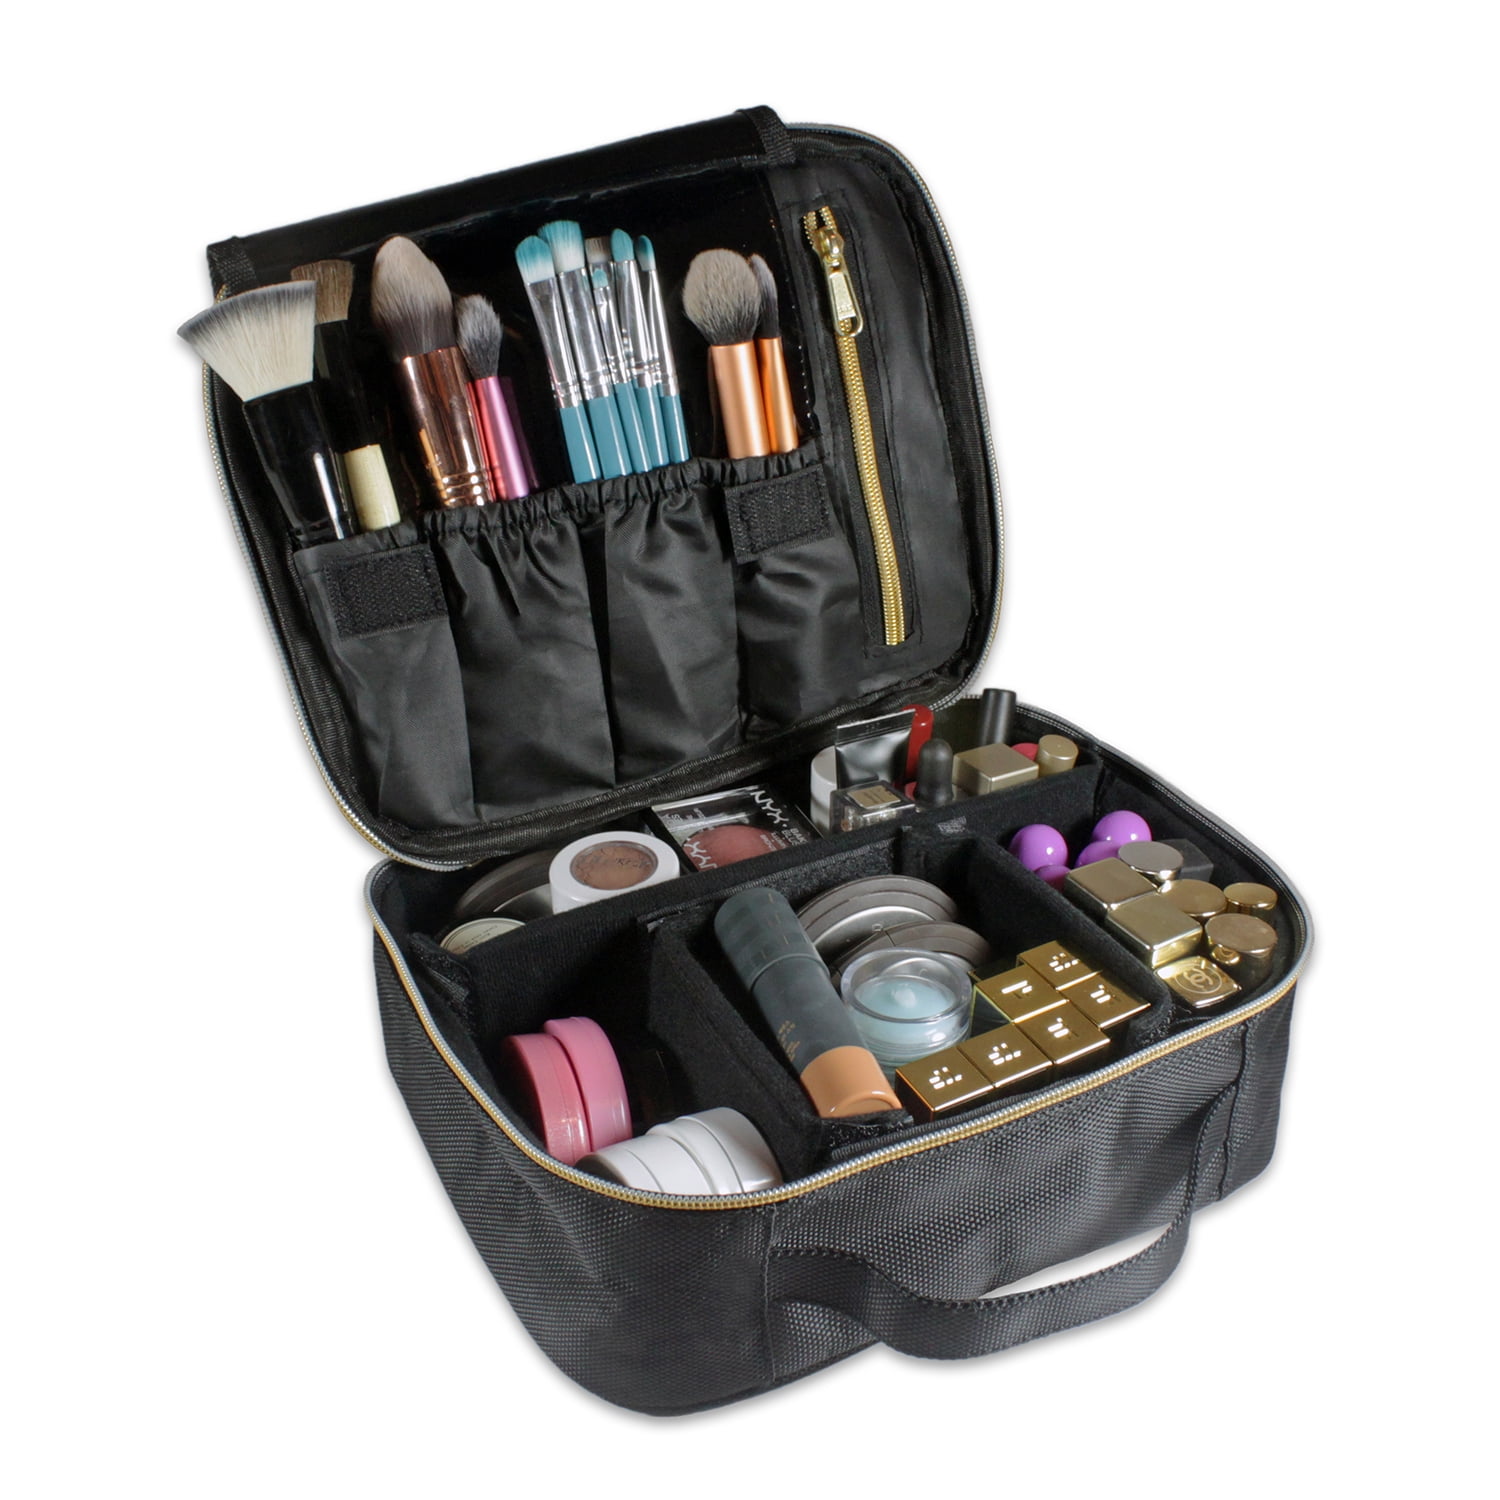 Impressions Vanity Co. Slayssentials Luxe 24-Inch Travel Organizer Makeup Case, Size: 14.5 in, Black